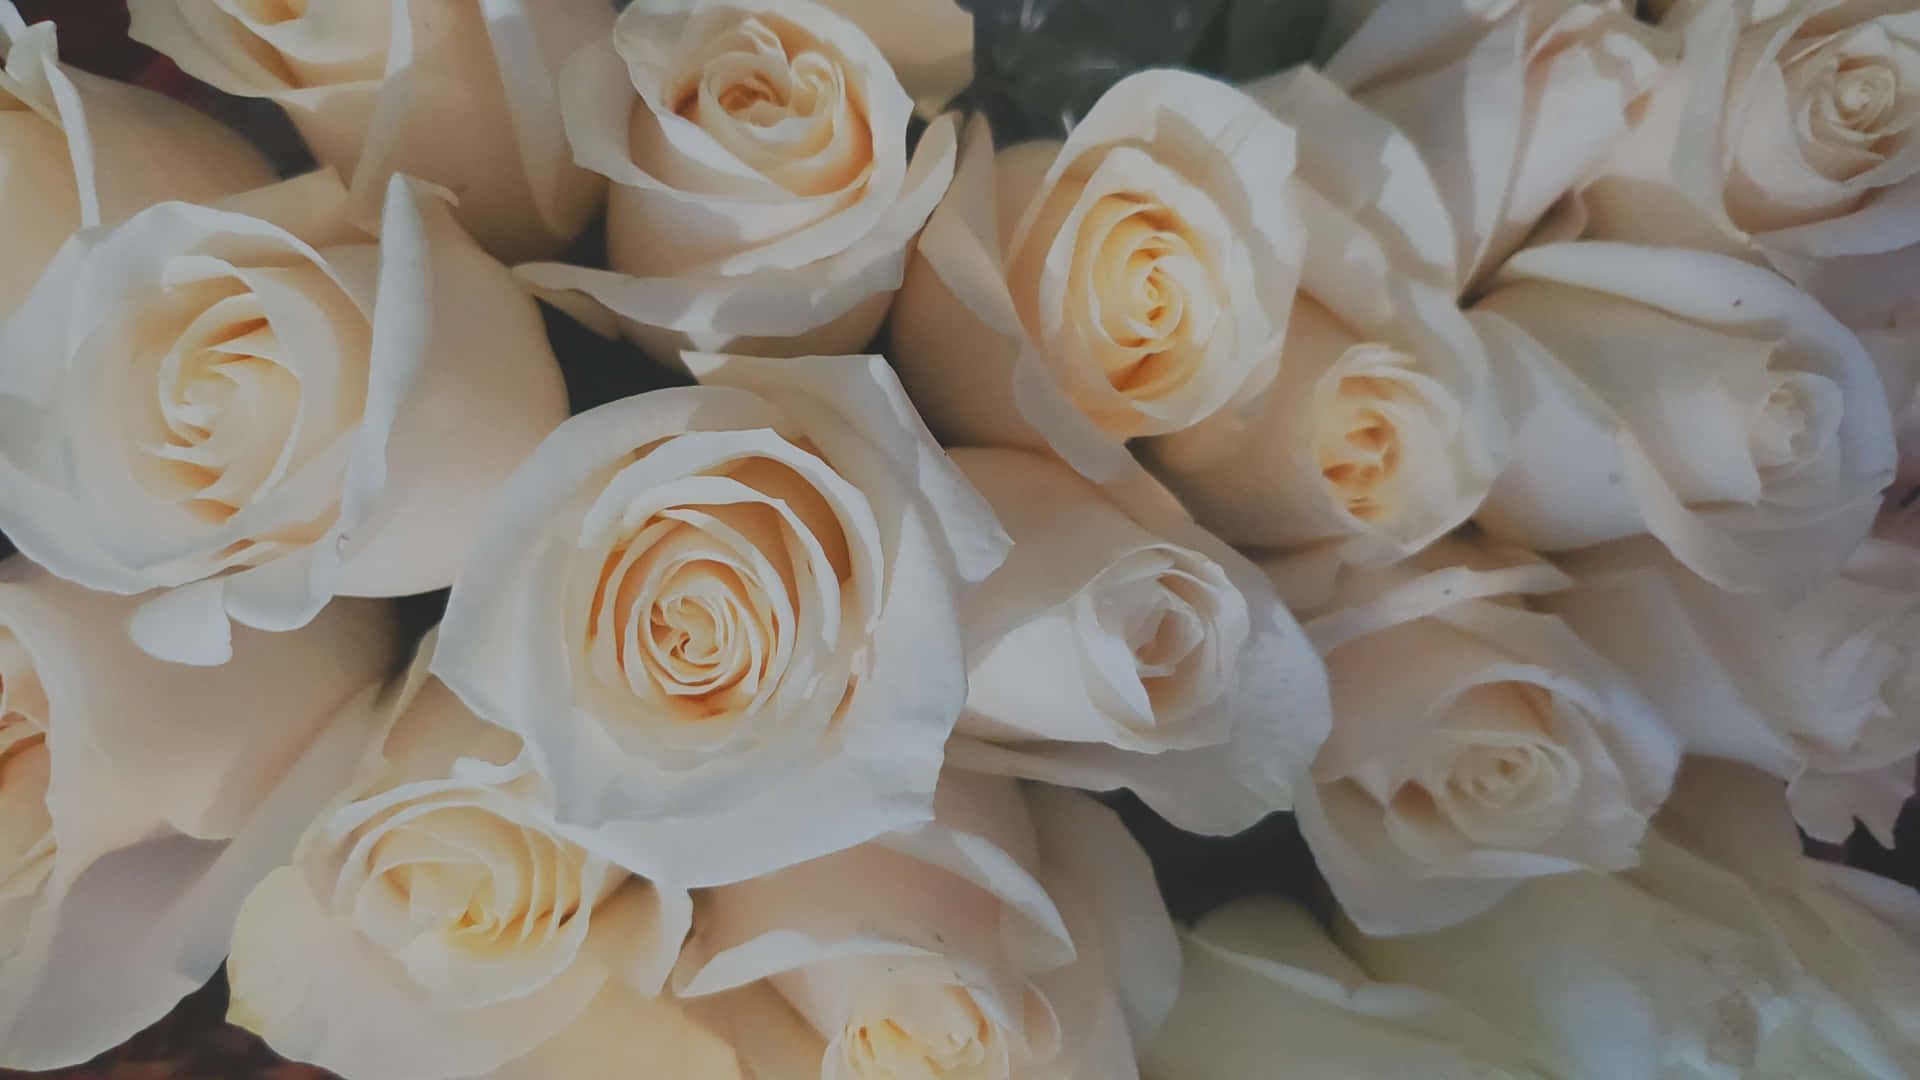 The timeless beauty of a delicate white rose